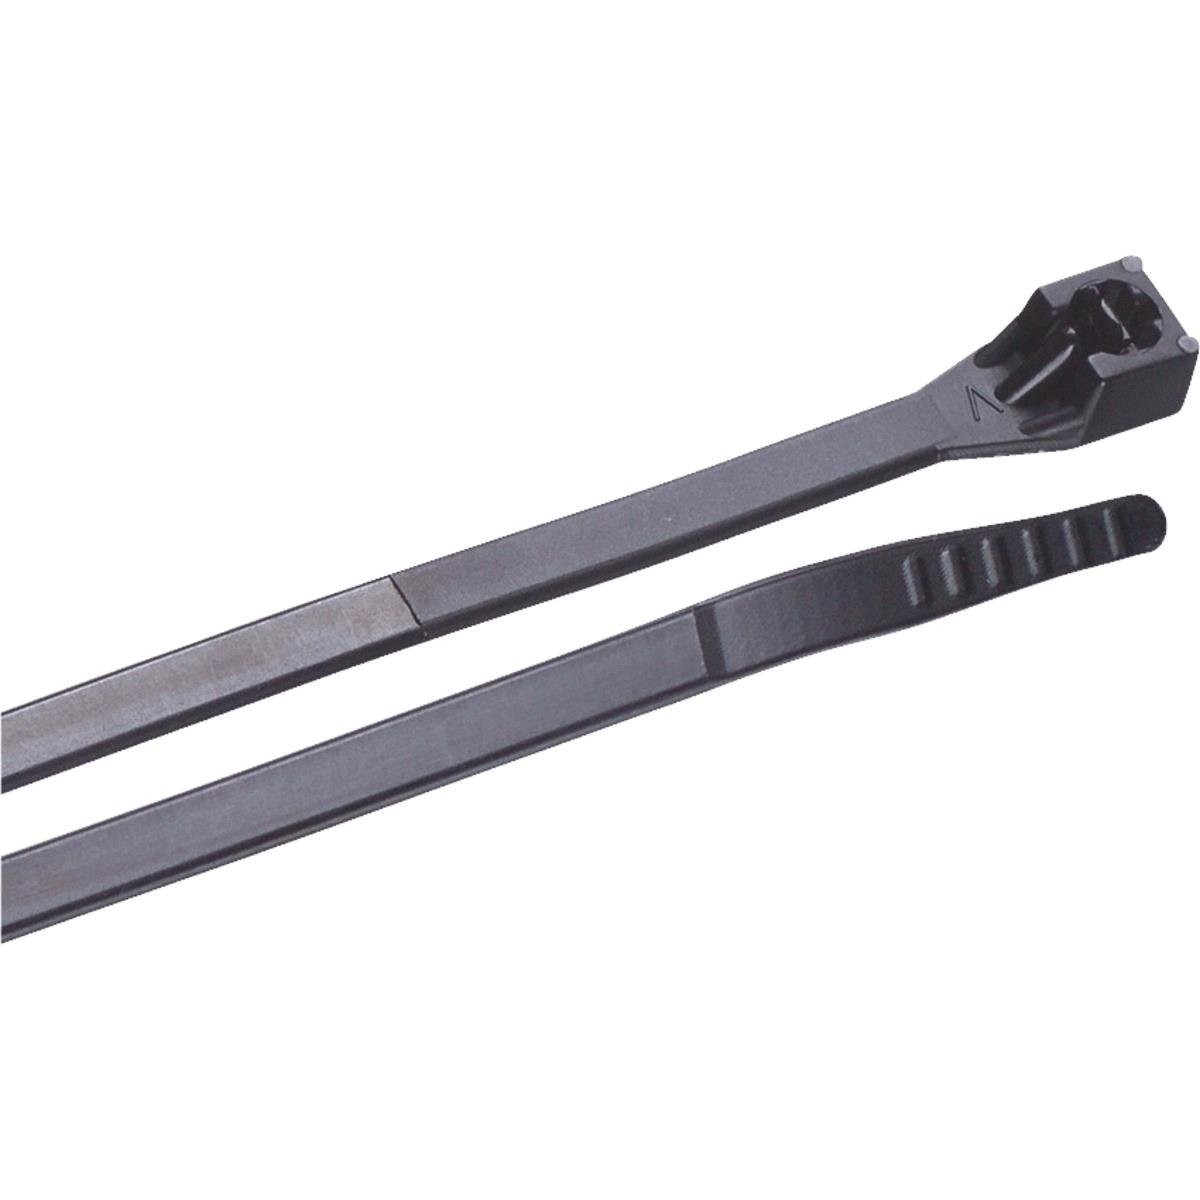 8" Black Releasable Cable Ties – Pack of 25